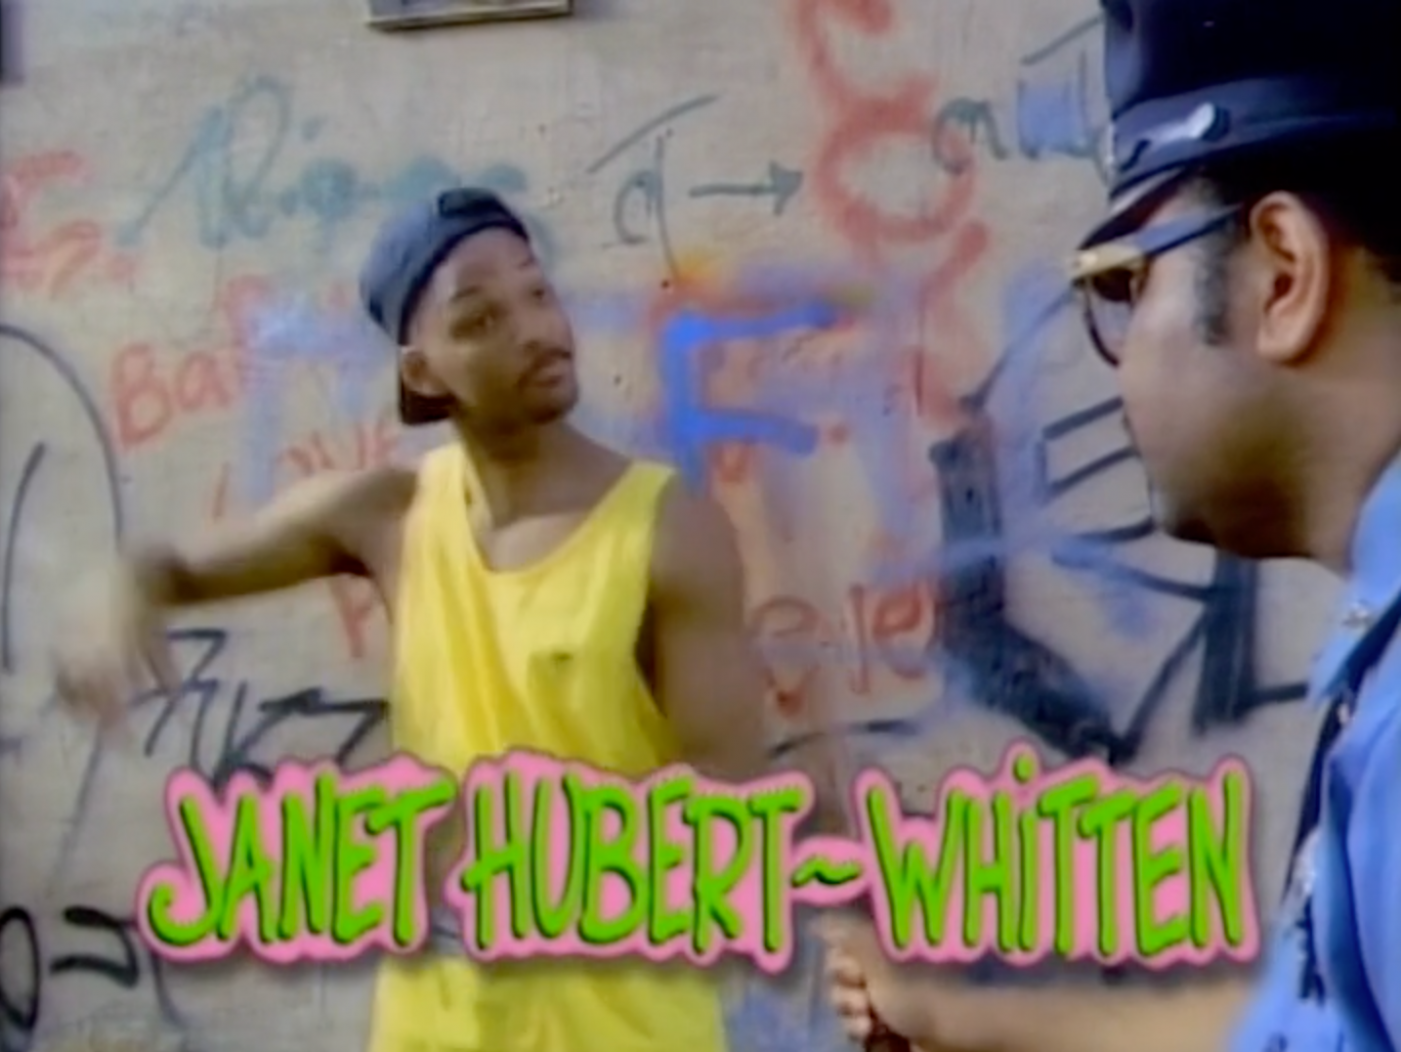 Fresh Prince Of Bel Air - cast names font, not the logo - Font